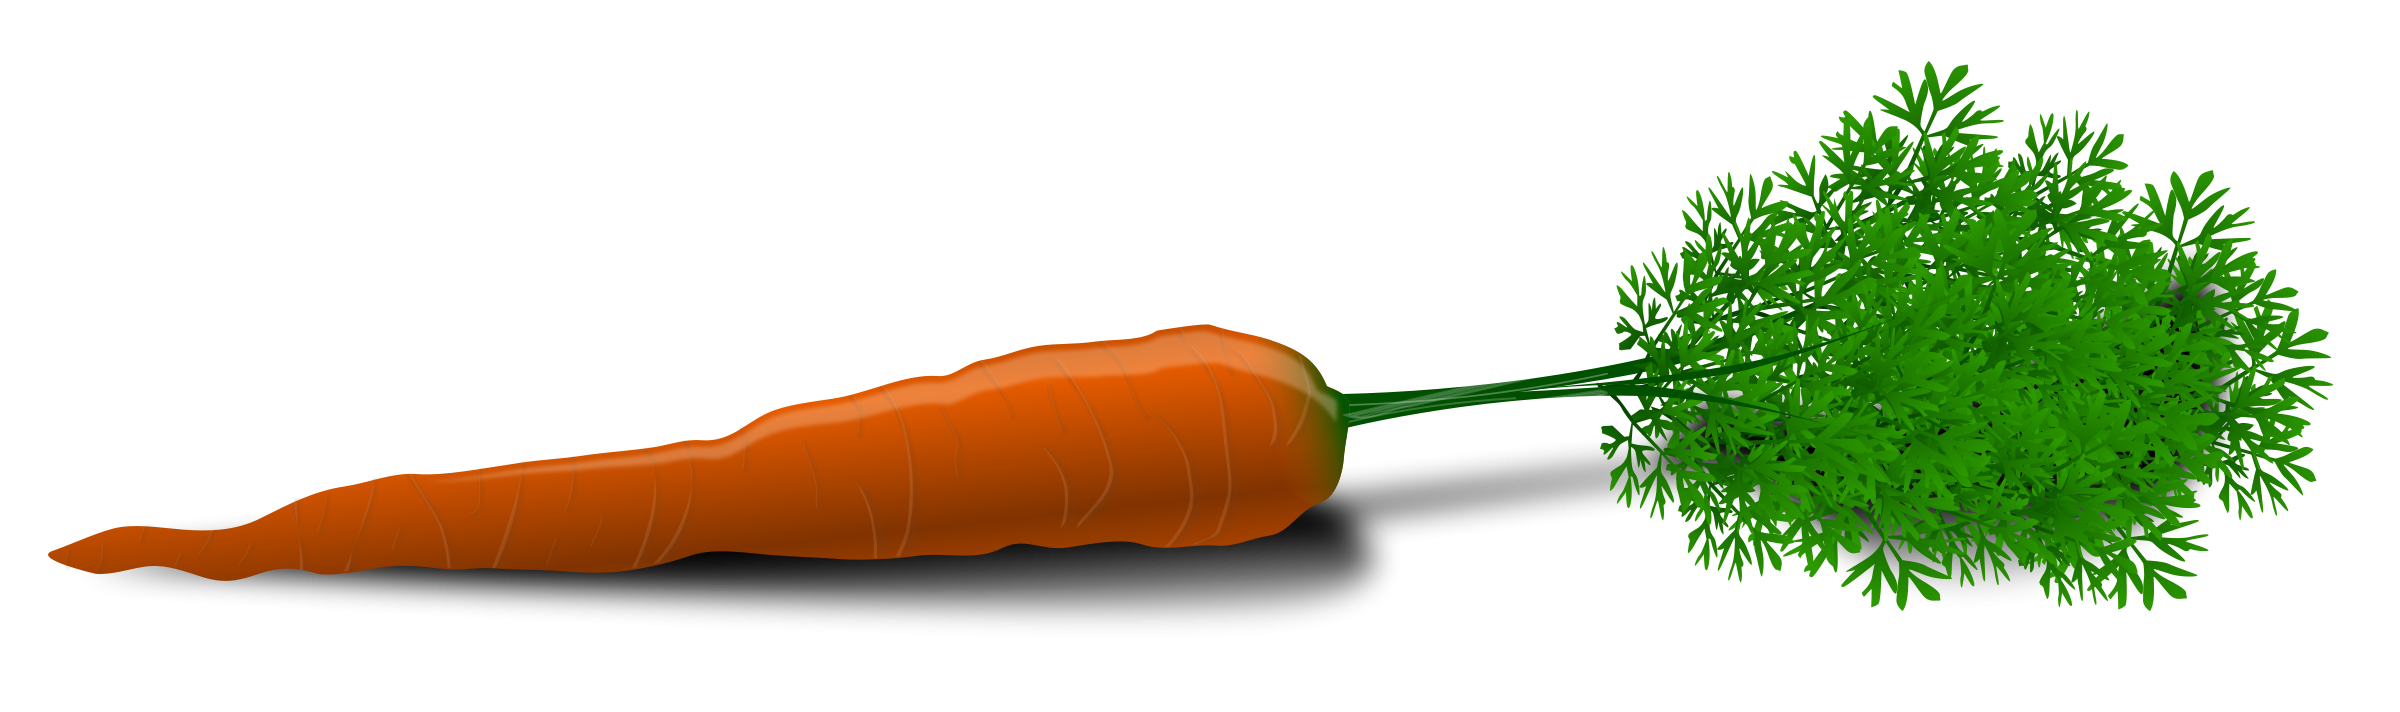 carrot PNG4986 